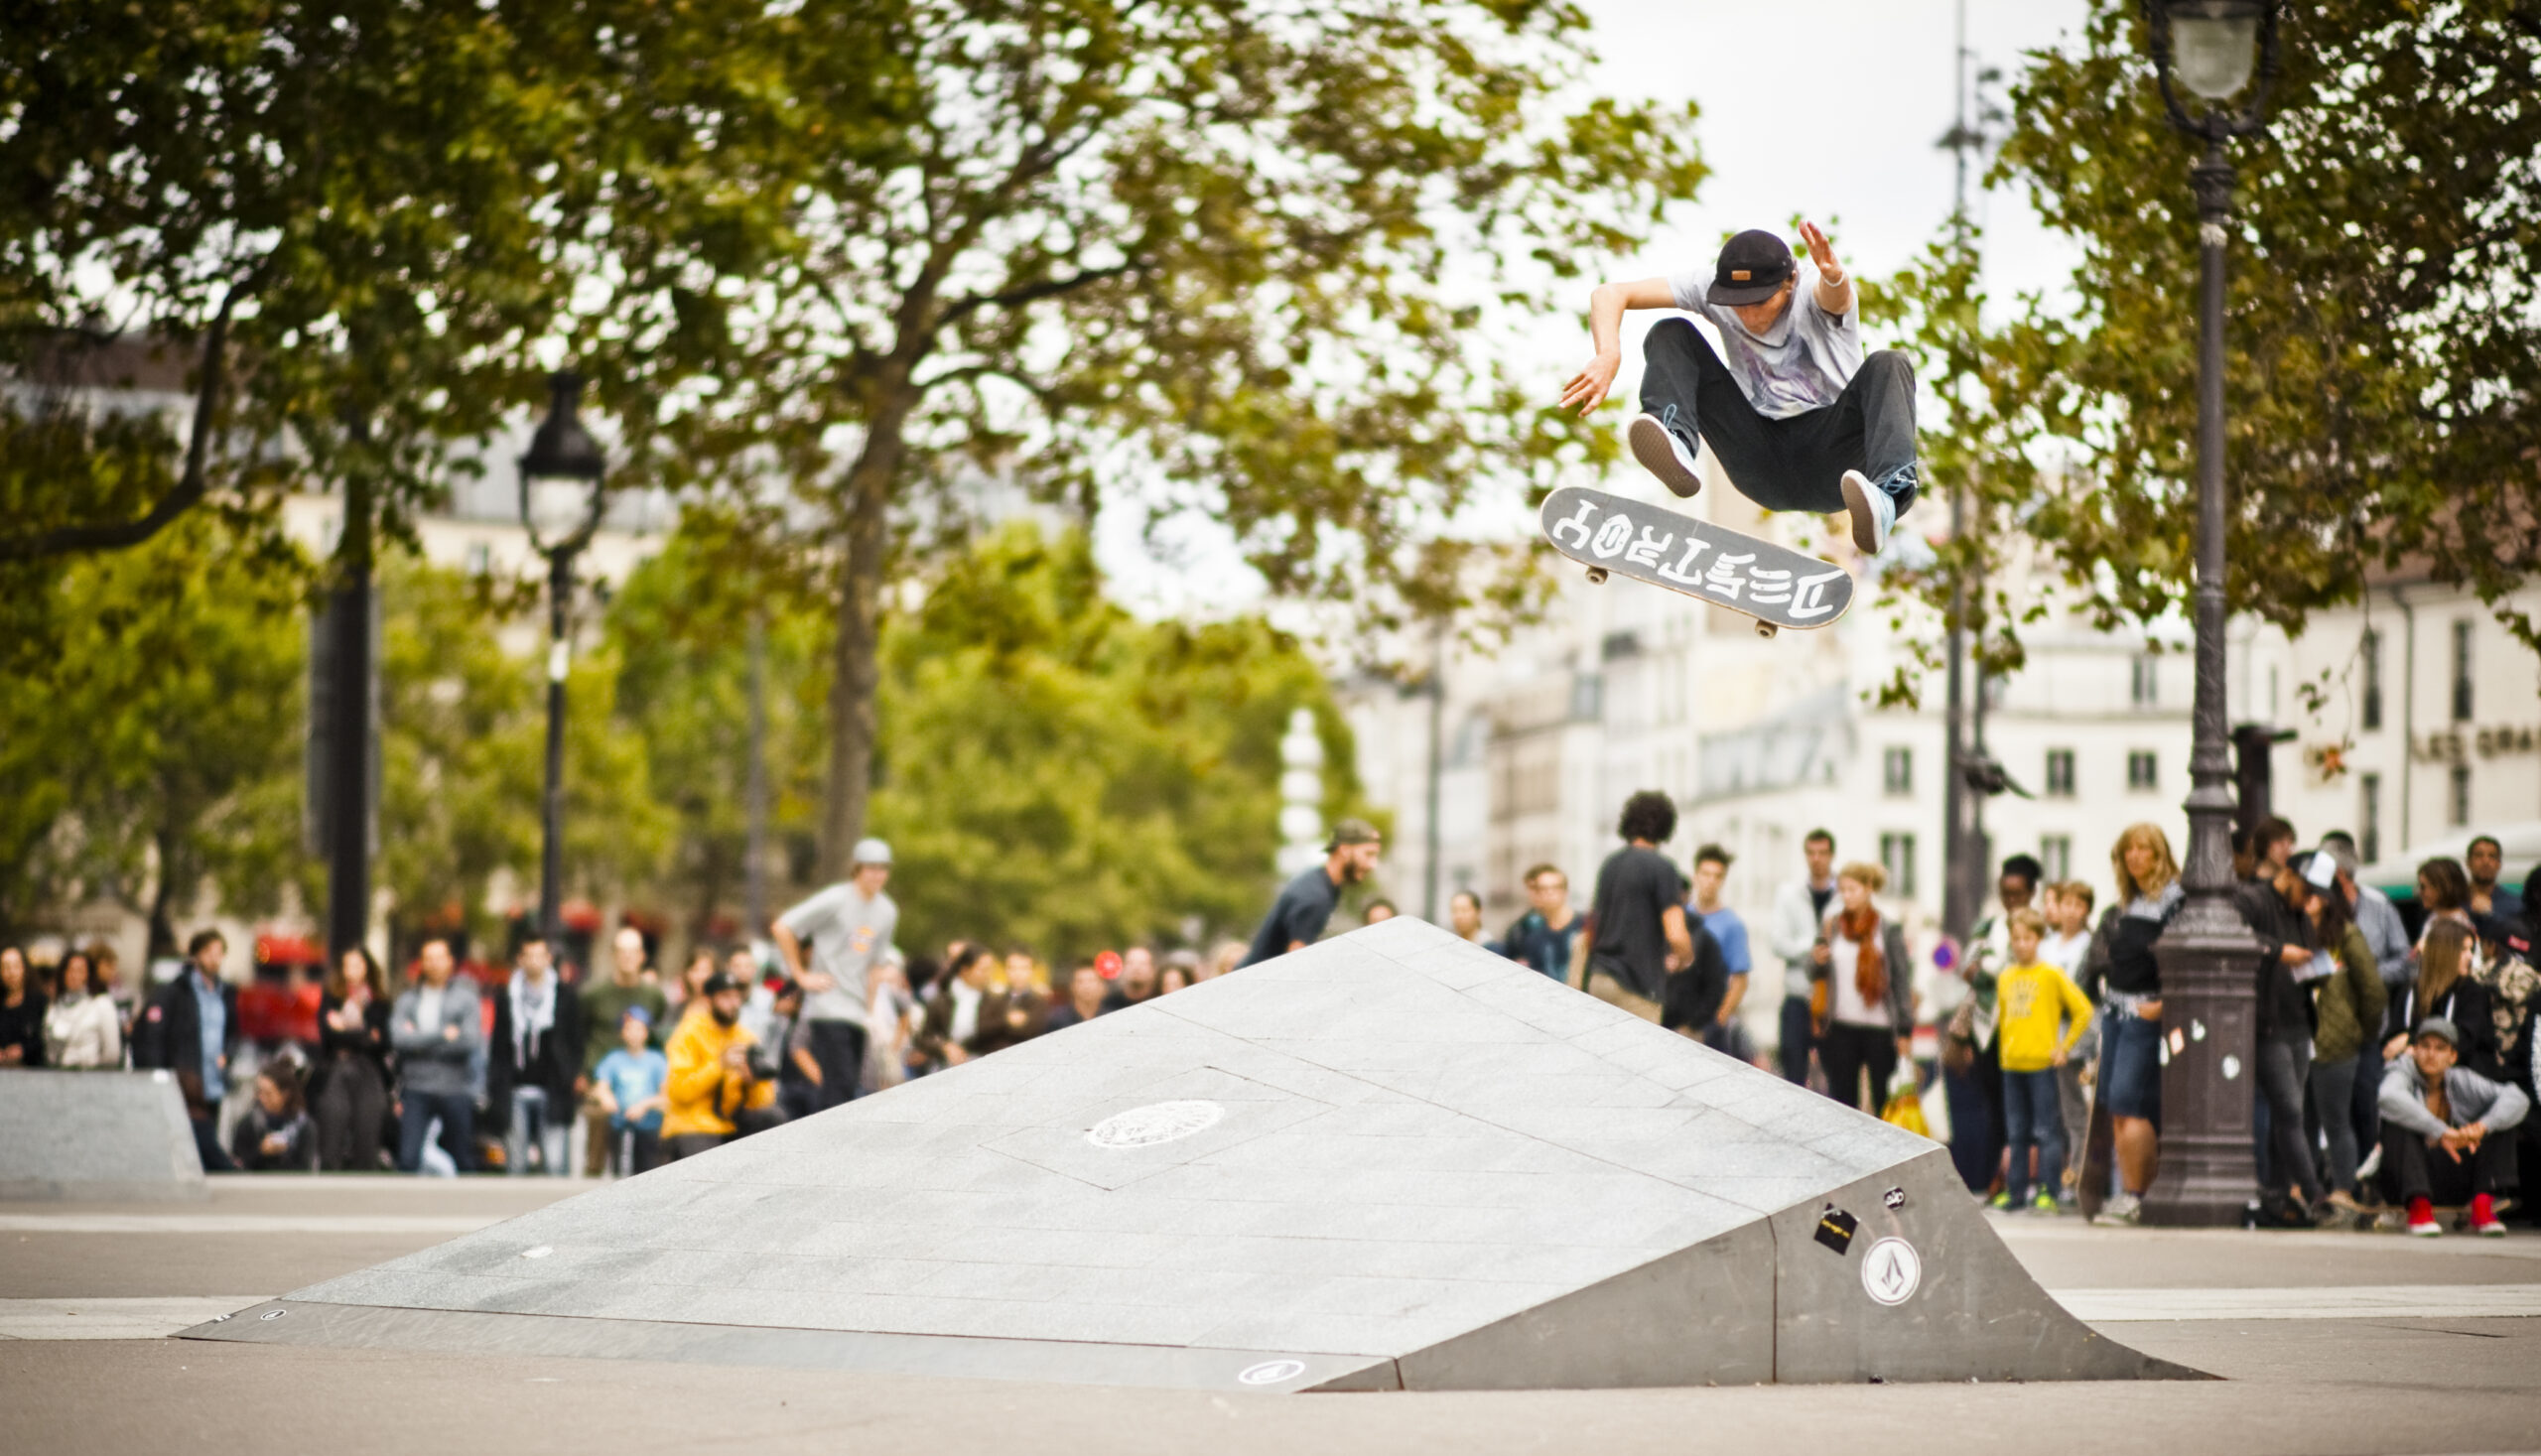 New skate plazas in cities from San Francisco to Paris are proving that making spaces skateable makes them safer and more dynamic, too. R osa Chang an